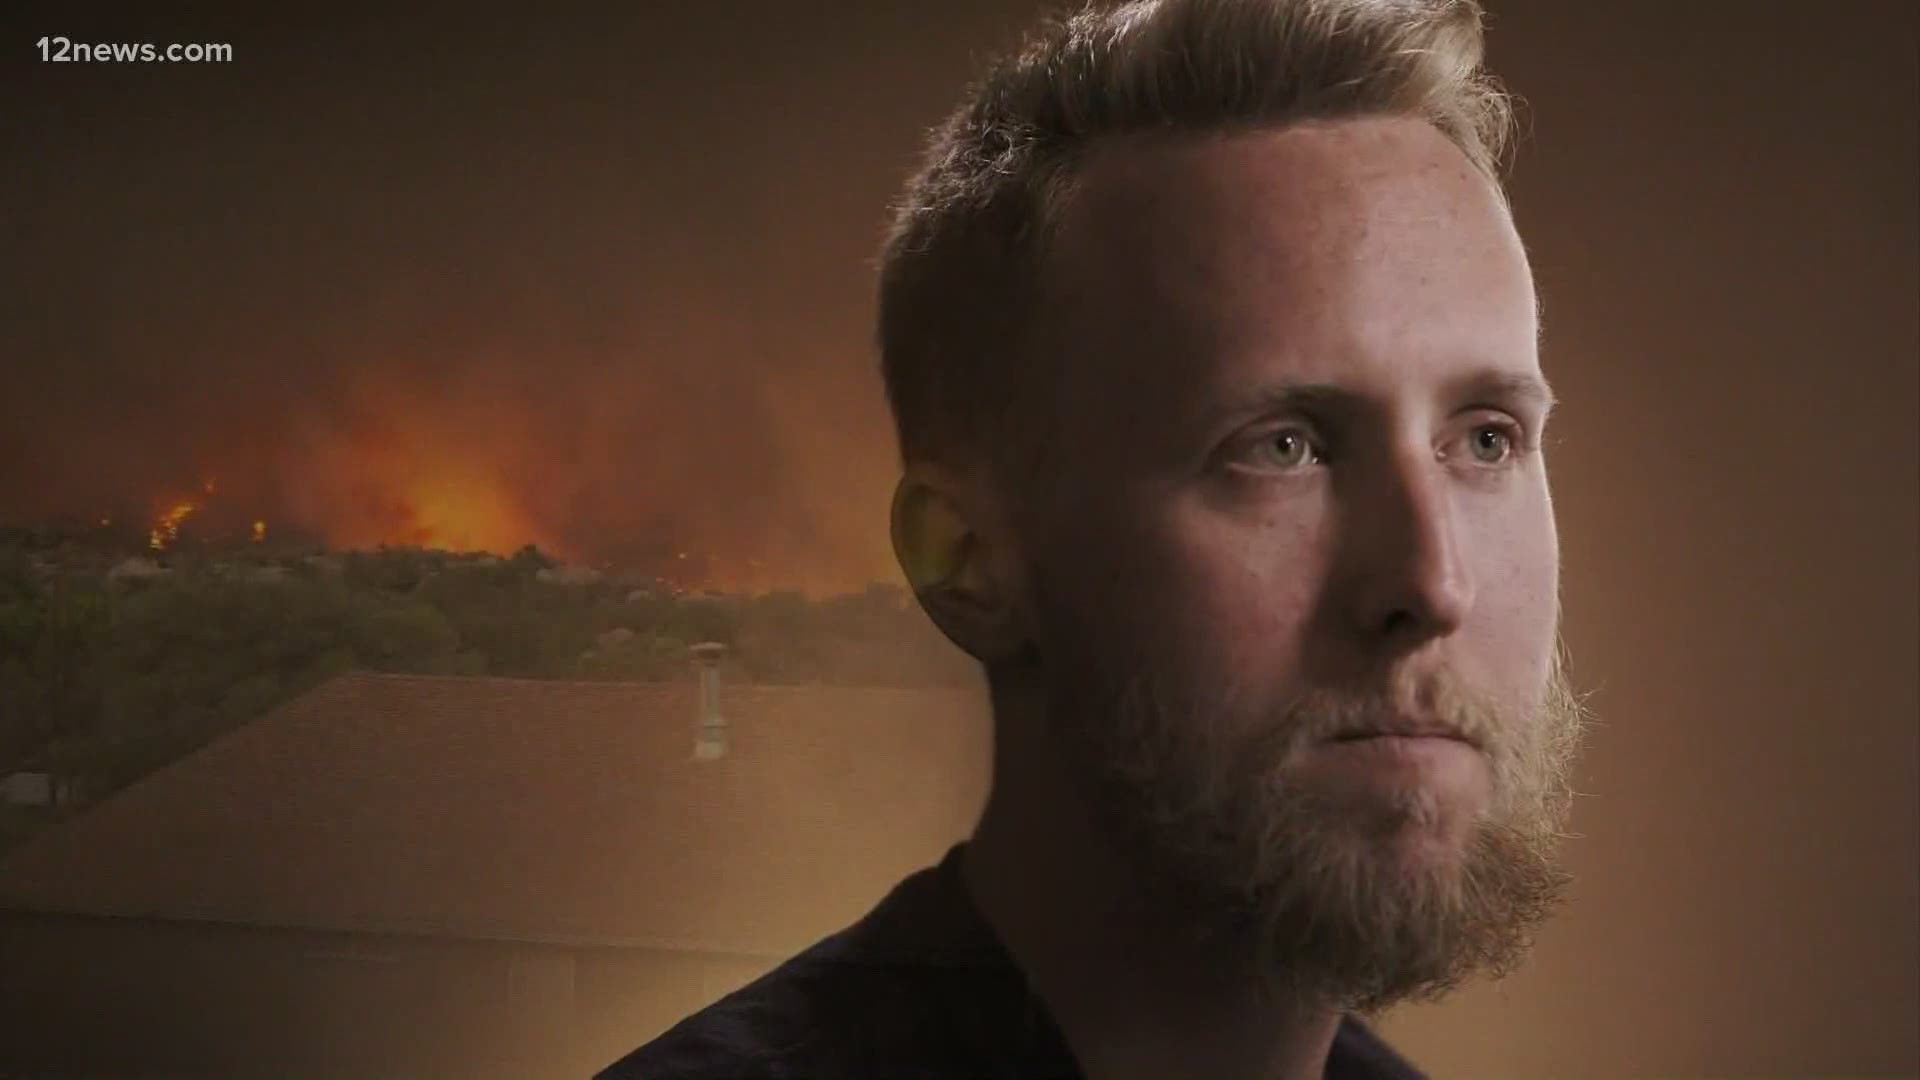 Brendan McDonough is the lone survivor of the Granite Mountain Hotshots. He marks the anniversary by remembering the 19 men he calls his brothers.